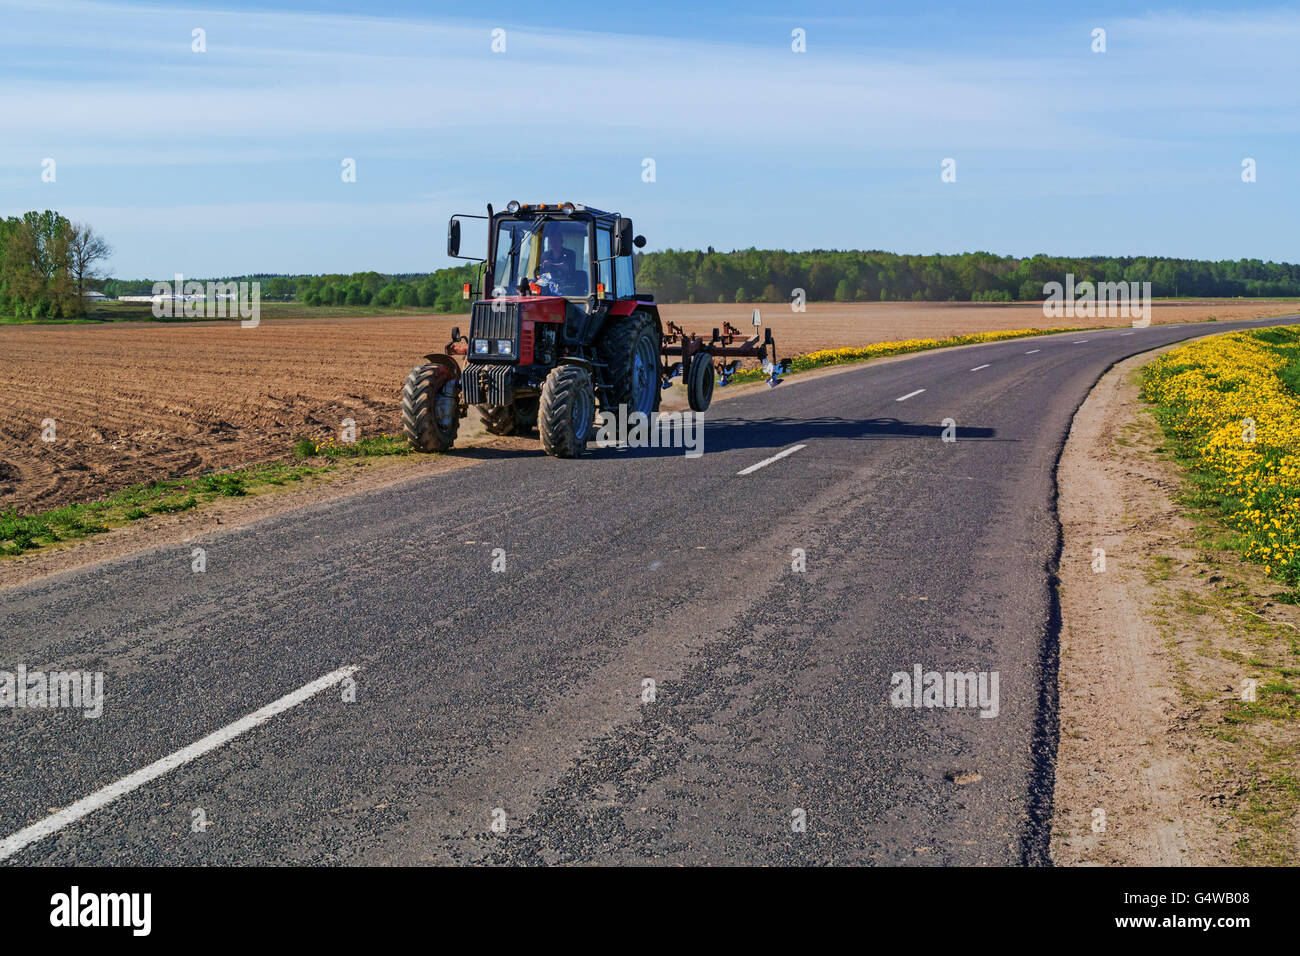 The peasant works at an agricultural field at tractor. Along the road yellow dandelions. Stock Photo